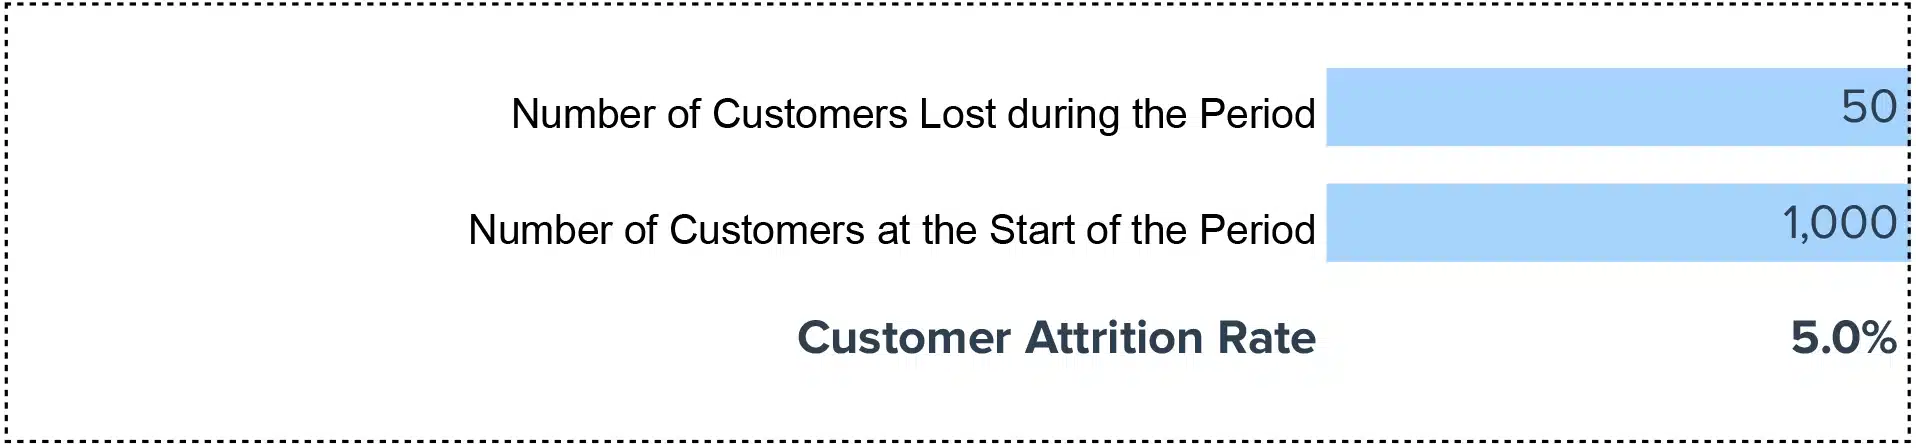 Customer Attrition Rate